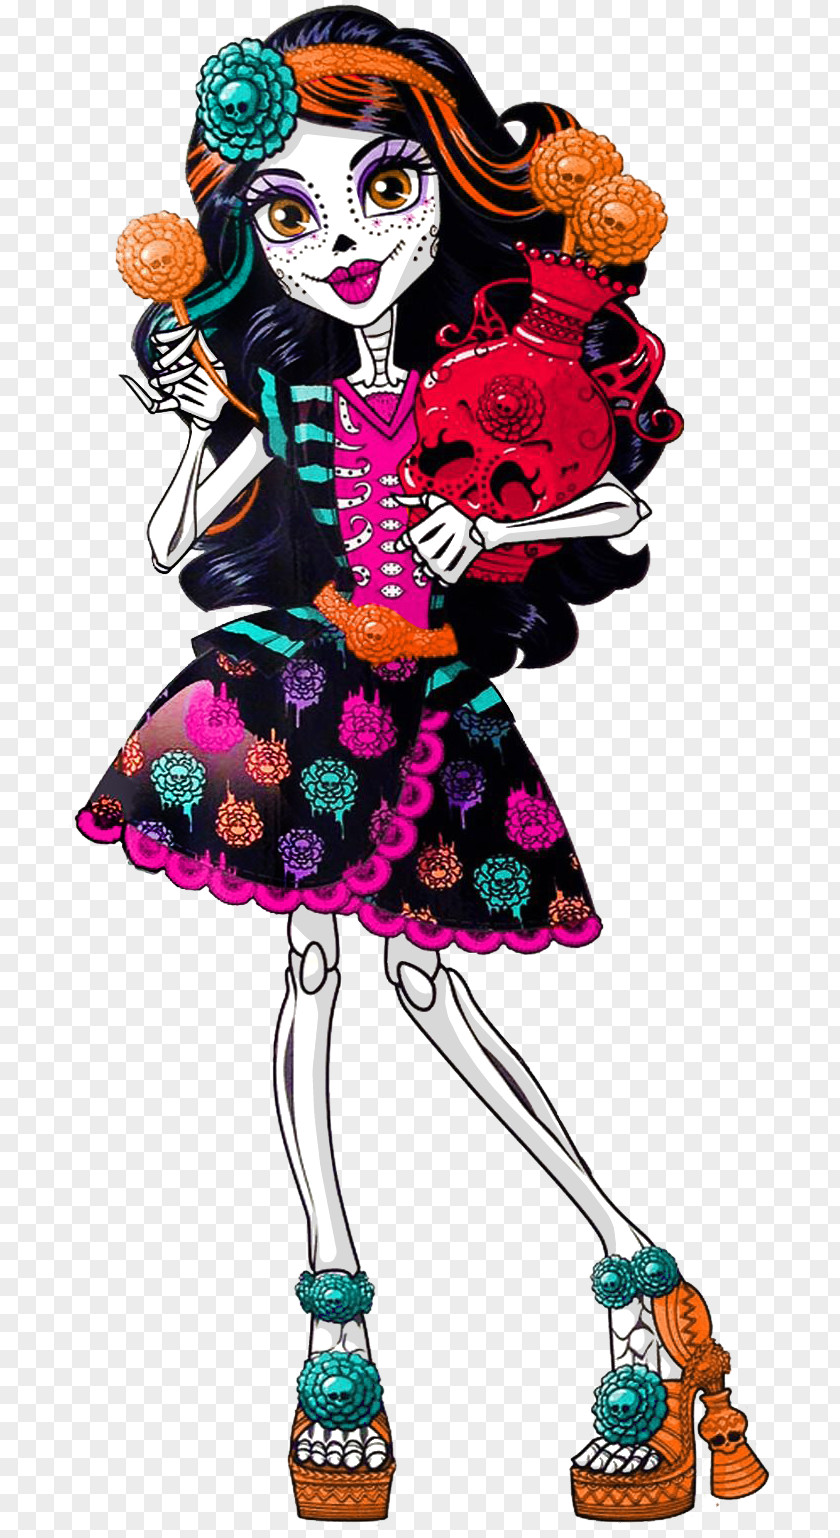 Class Room Monster High Skelita Calaveras Doll Toy Ghoul PNG